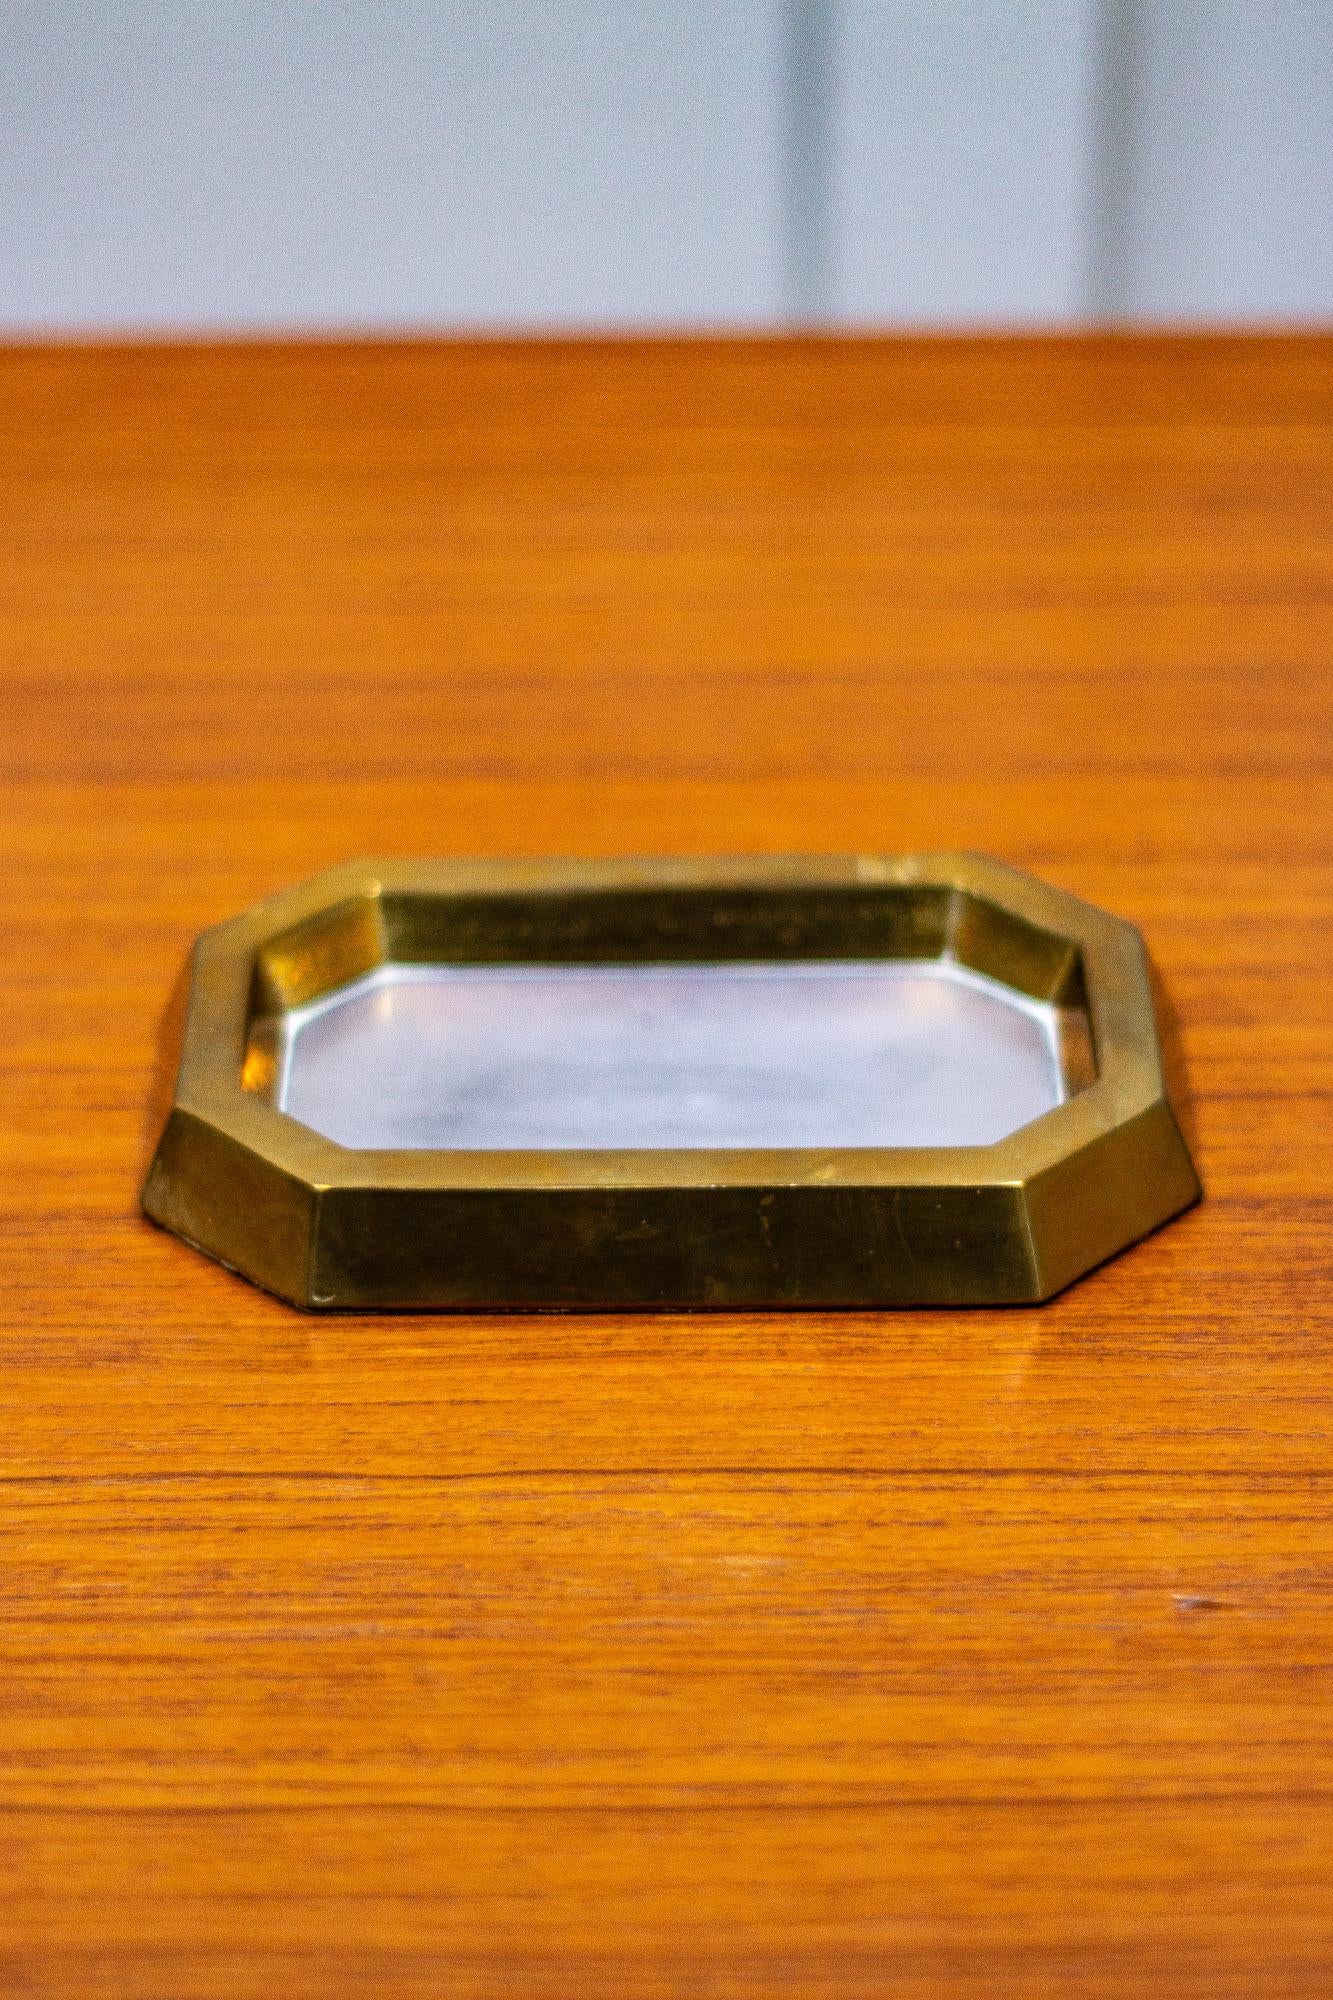 A David Marshall Brutalist Aluminum and cast brass dish, 1970.

David Marshall born in Scotland and moved to Spain. The dish is made of aluminum and brass, with a leather cover on the base. 

Measures: Height 20mm
Length 17.5cm 
Depth 12cm.